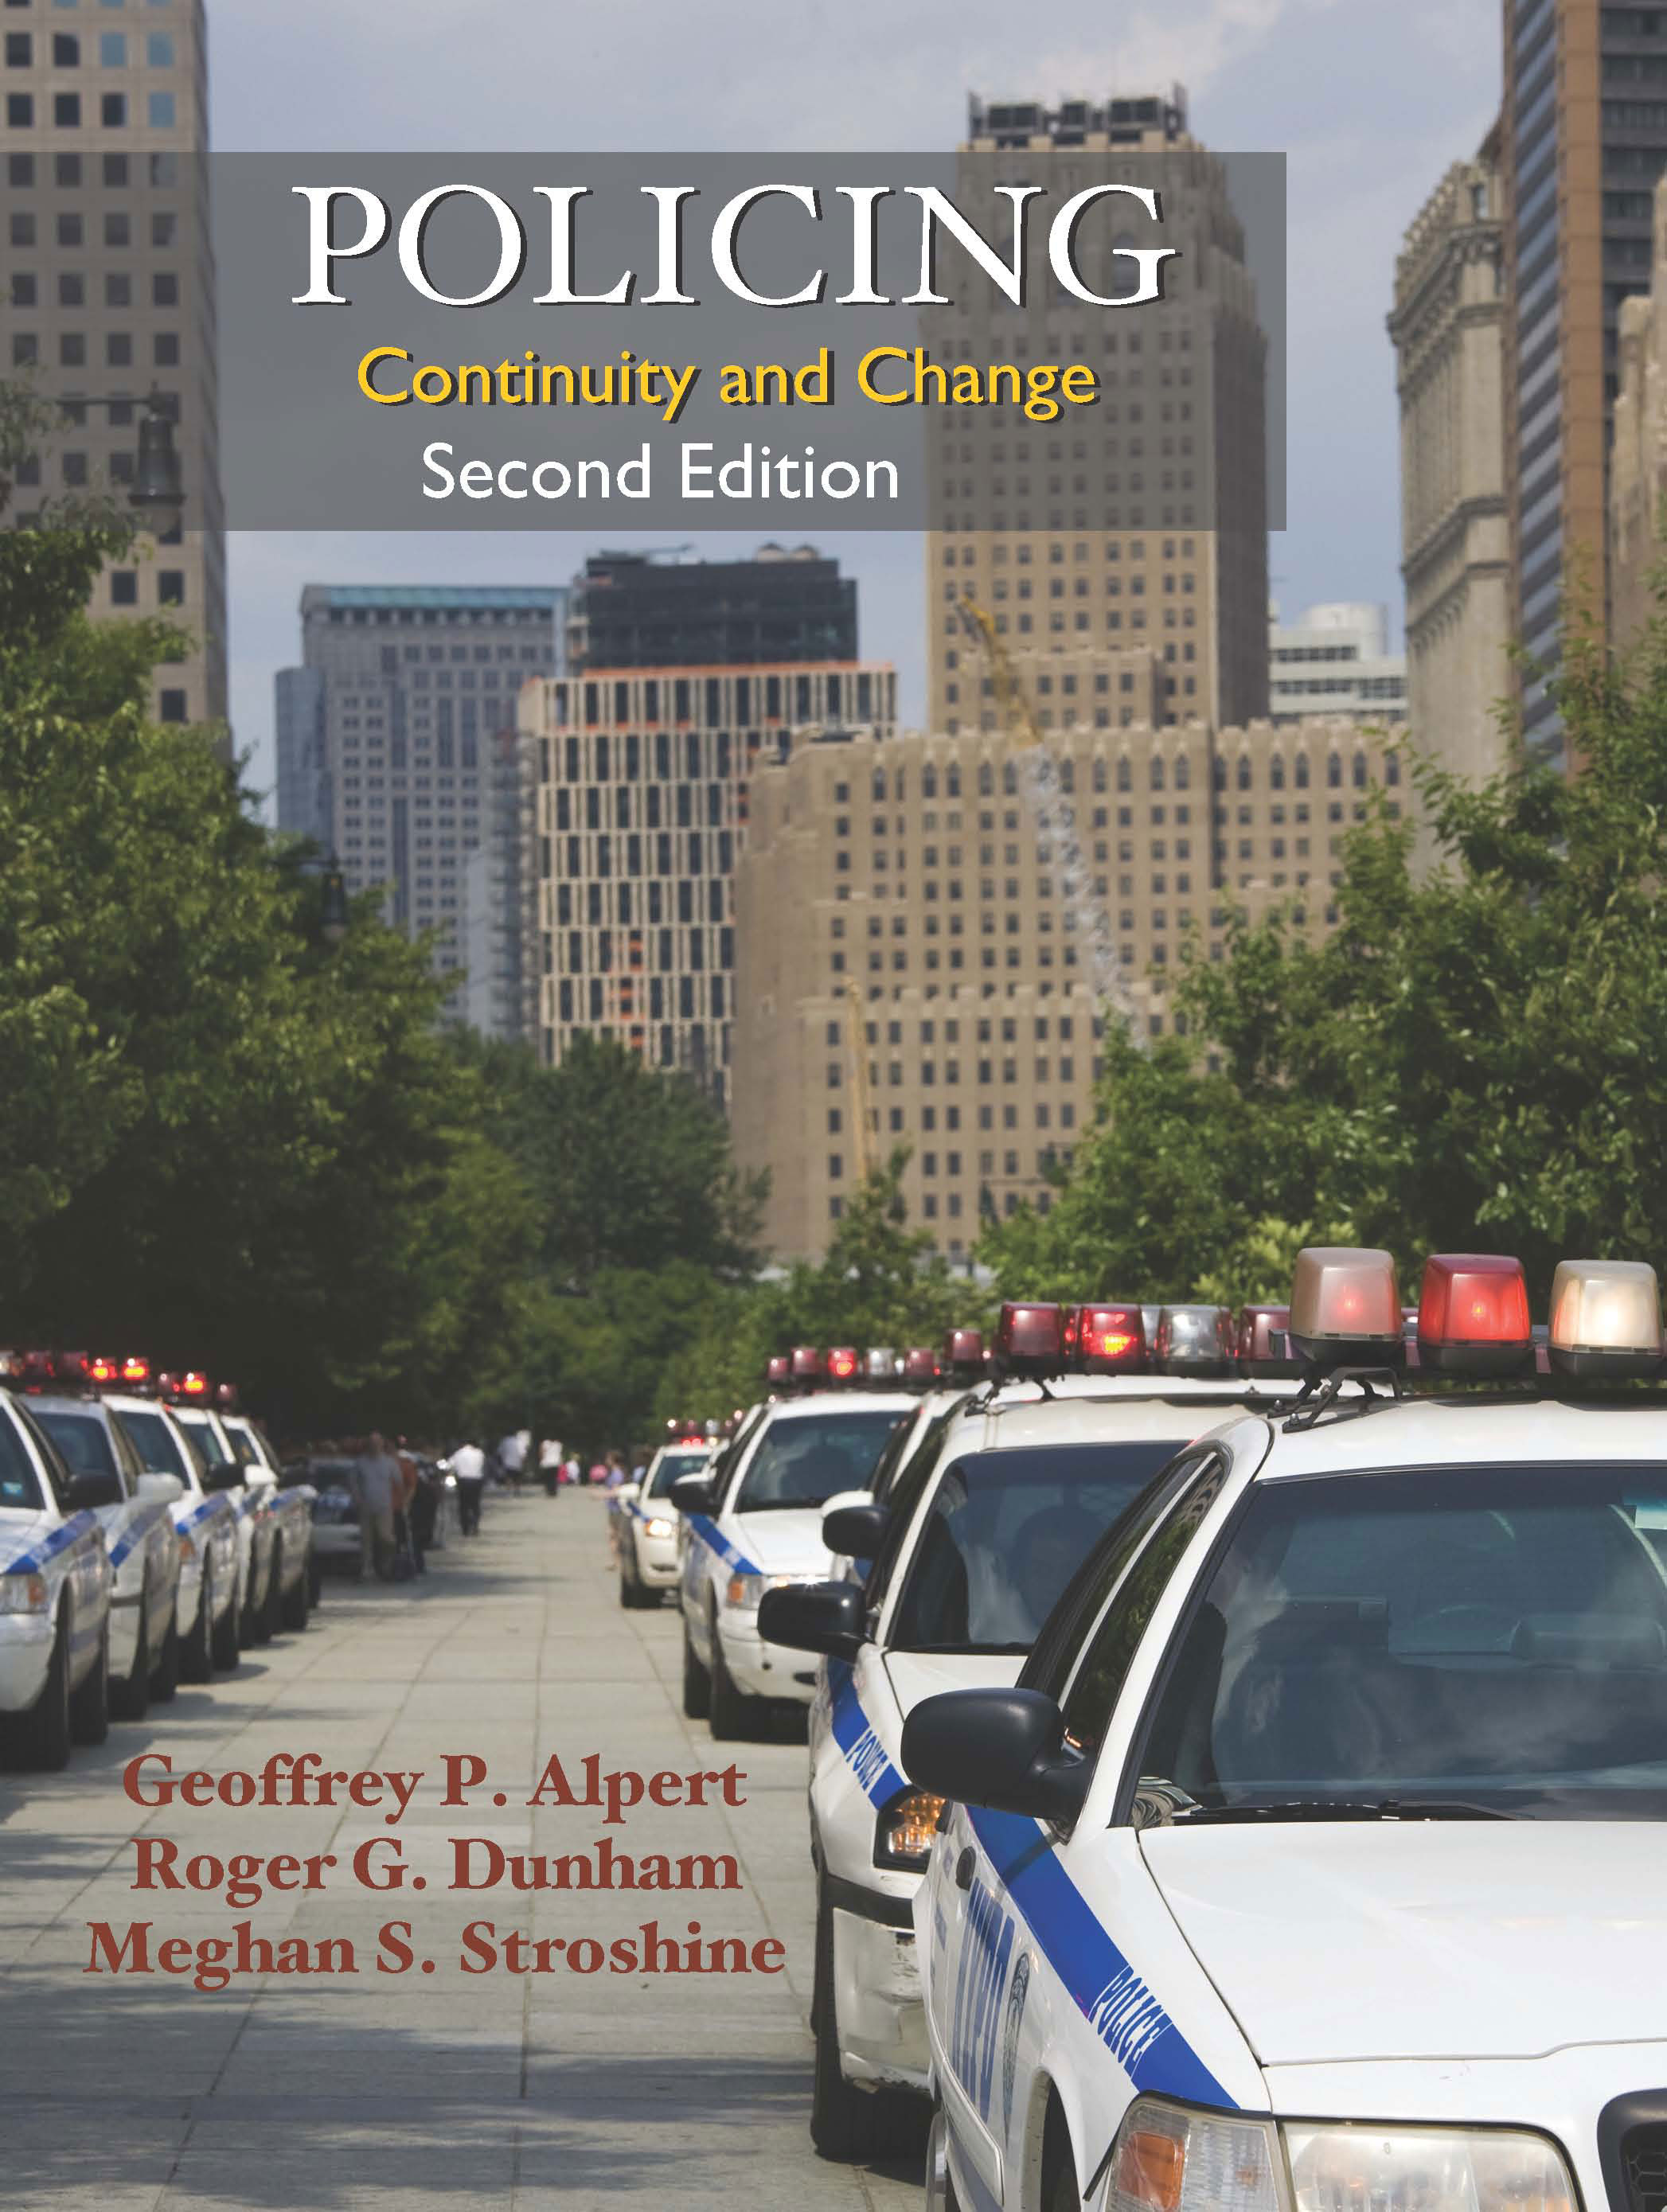 Policing: Continuity and Change, Second Edition by Geoffrey P. Alpert, Roger G. Dunham, Meghan S. Stroshine